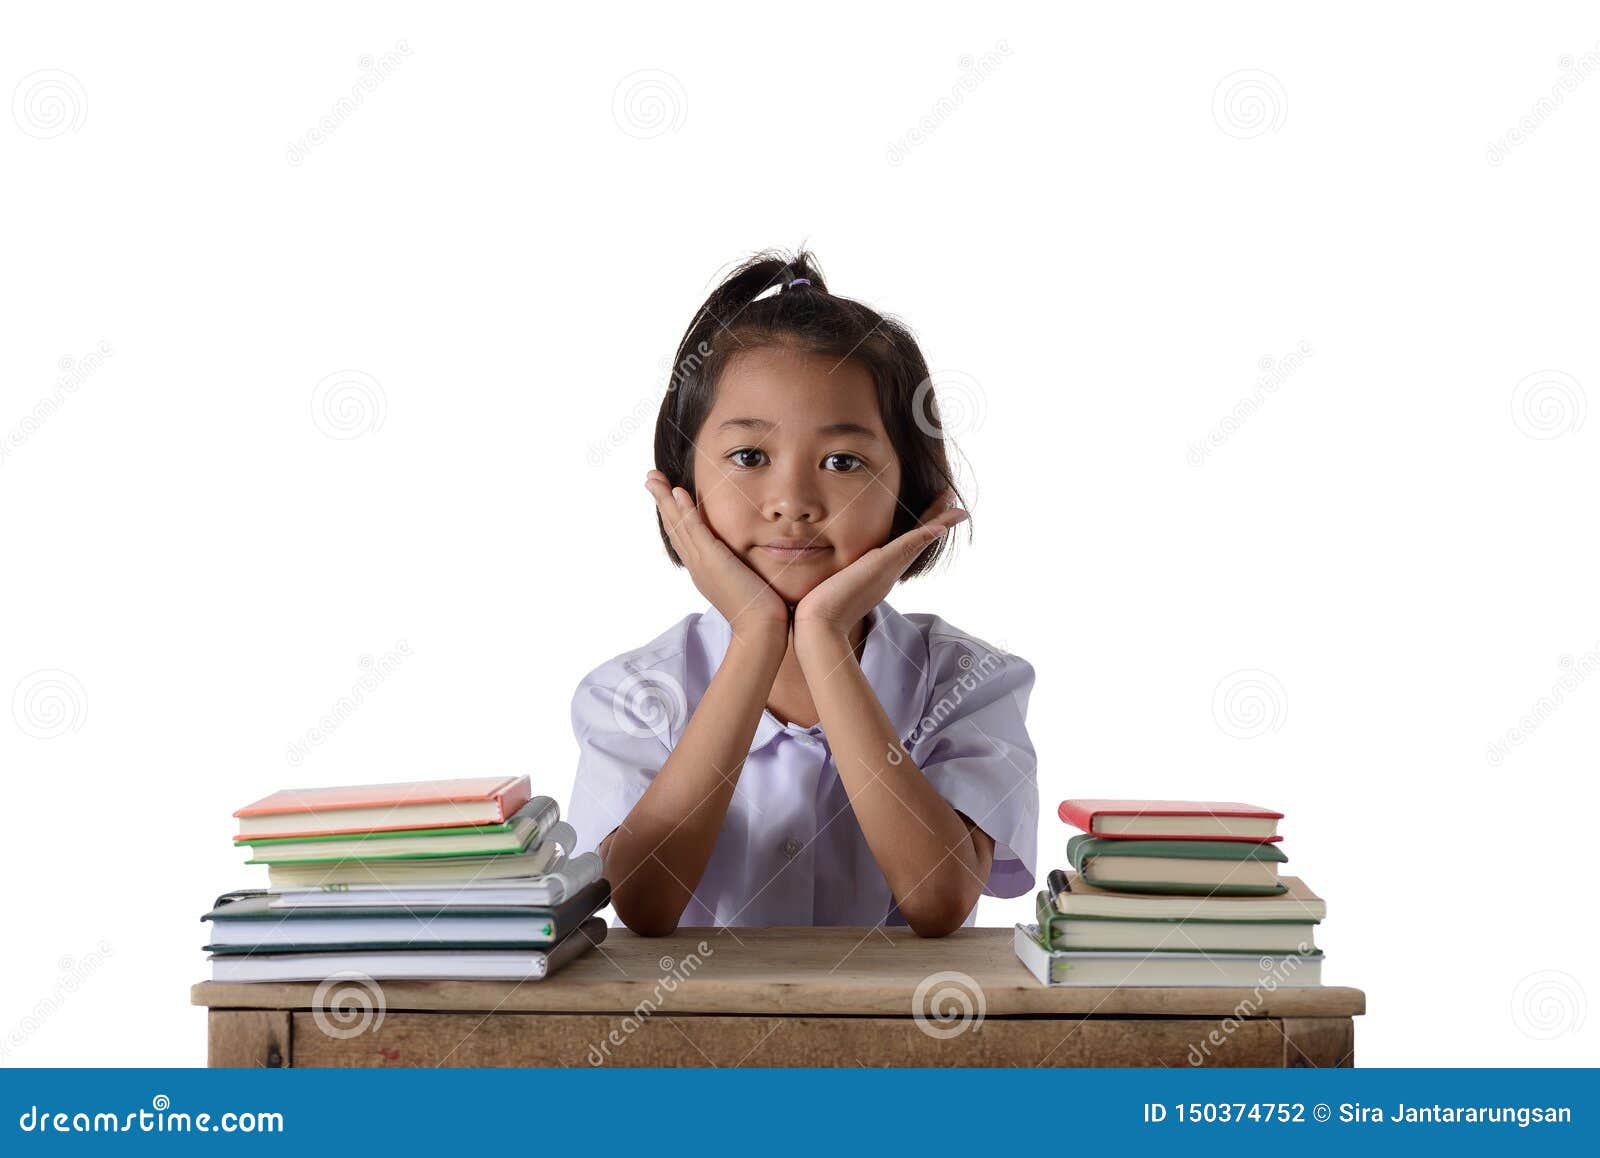 Portrait Of Smiling Little Student Asian Girl With Many Books Education